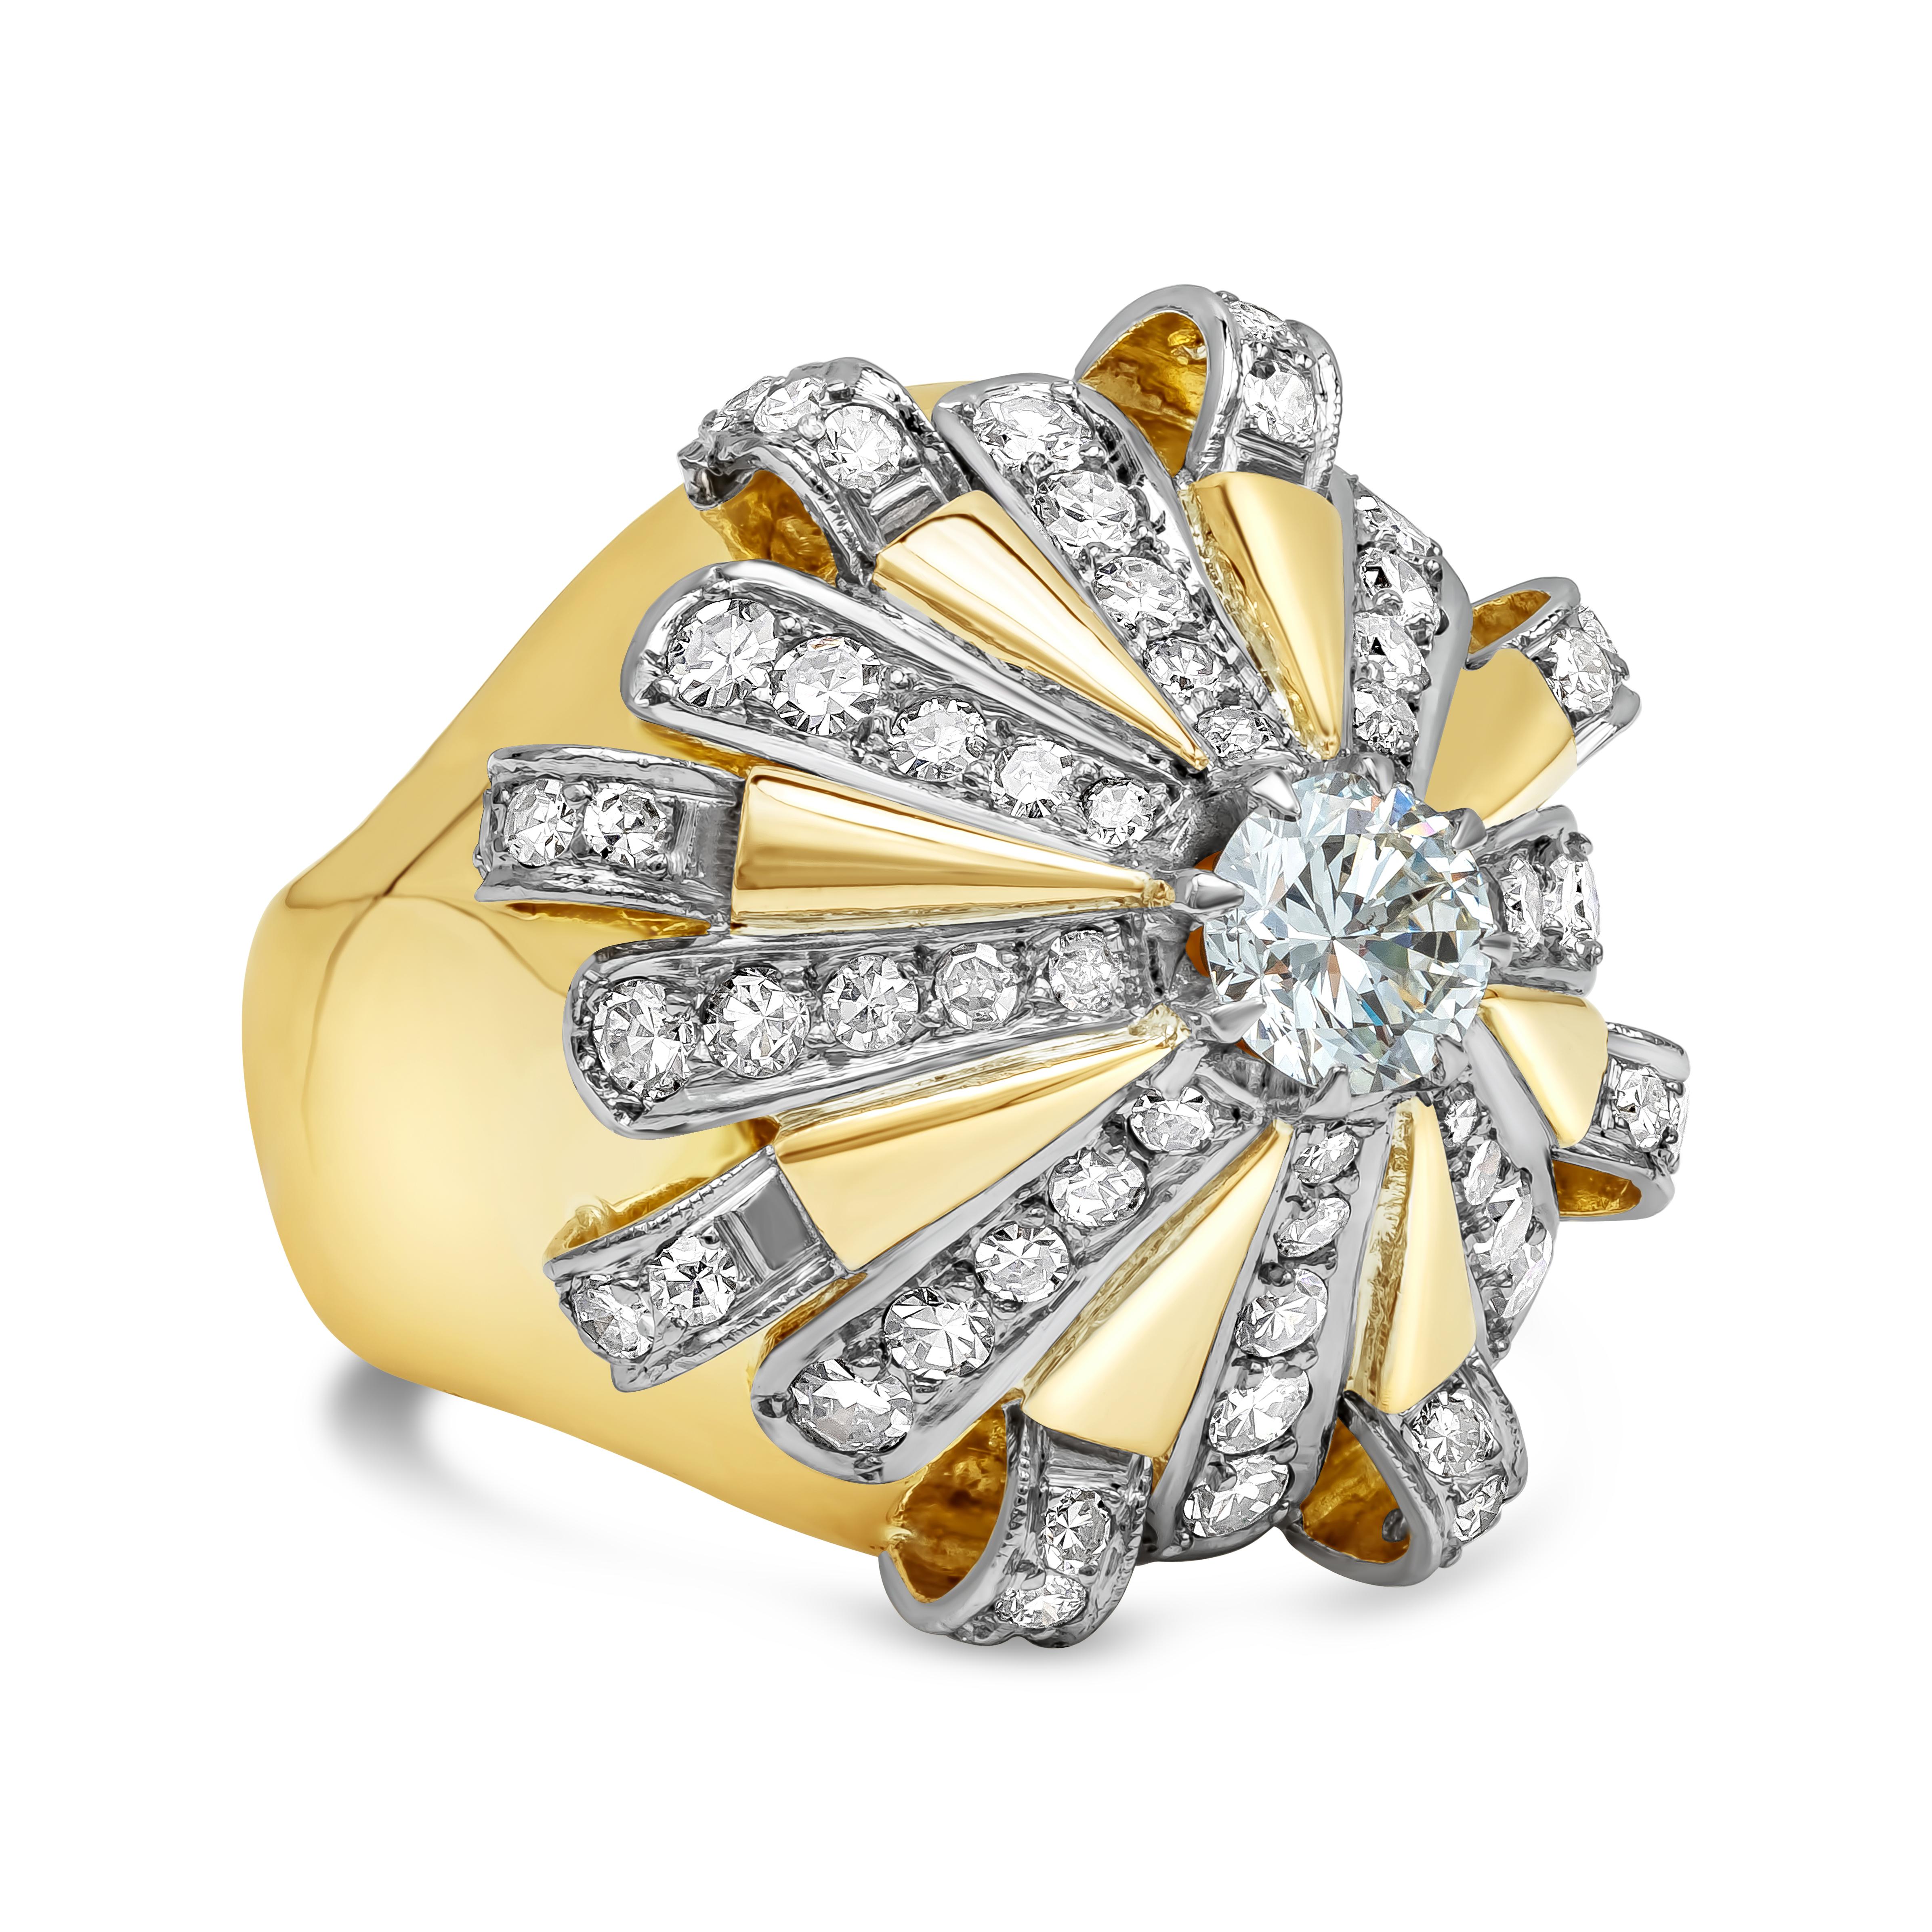 A beautiful and unique cocktail ring showcasing a 0.70 carats round brilliant diamond center, accented by 8 rows of smaller round brilliant diamonds arranged in a carousel design. Accent diamonds weigh 1.36 carats total. Made in 18k yellow gold and